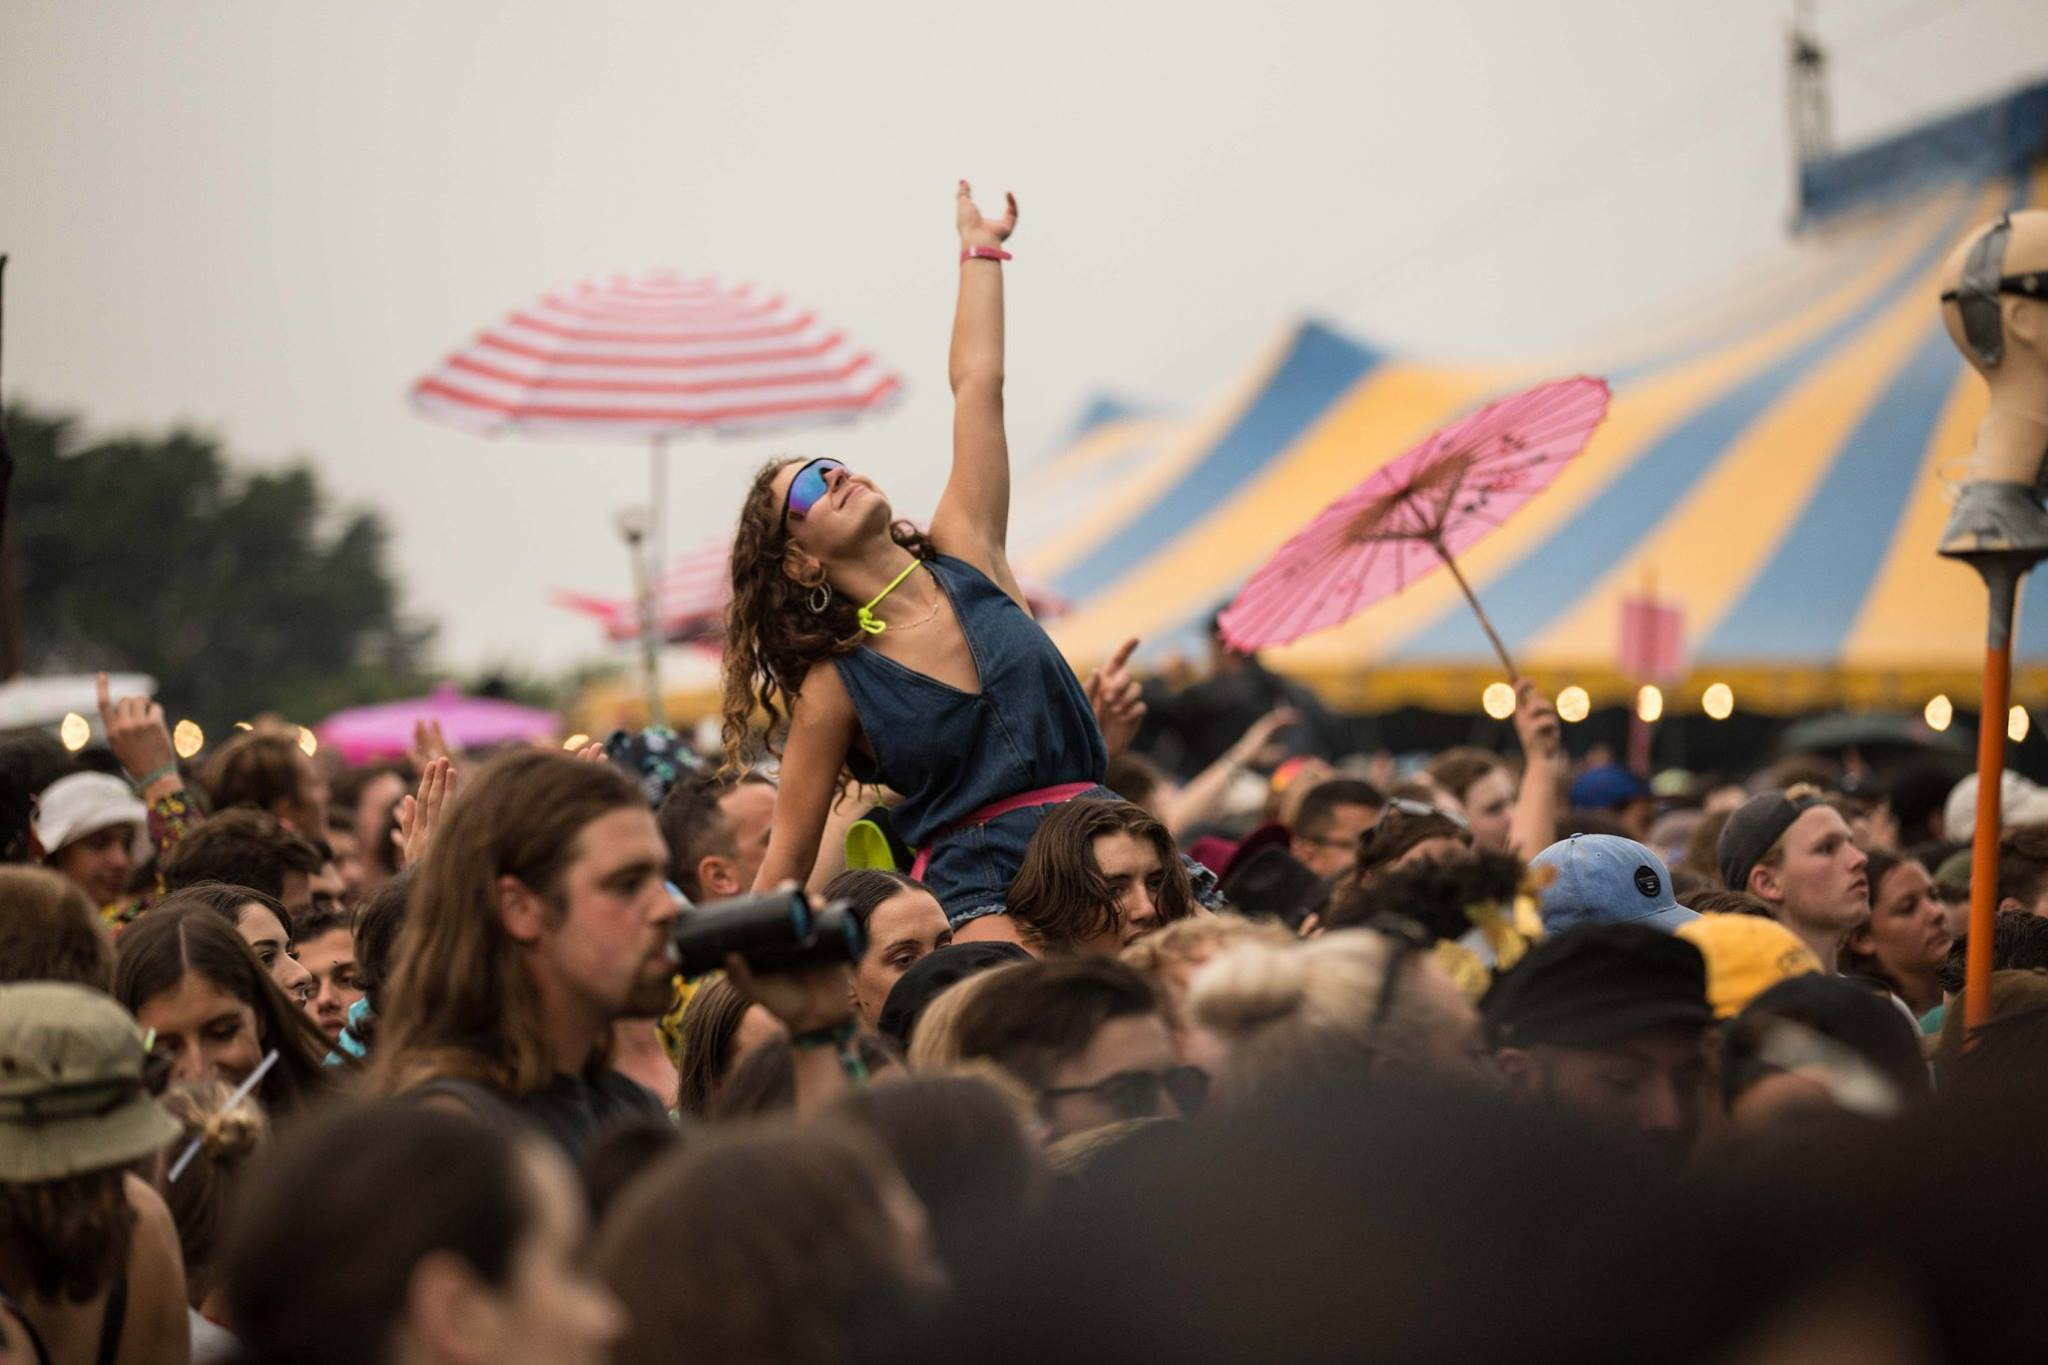 Girl on top of crowd at music festival